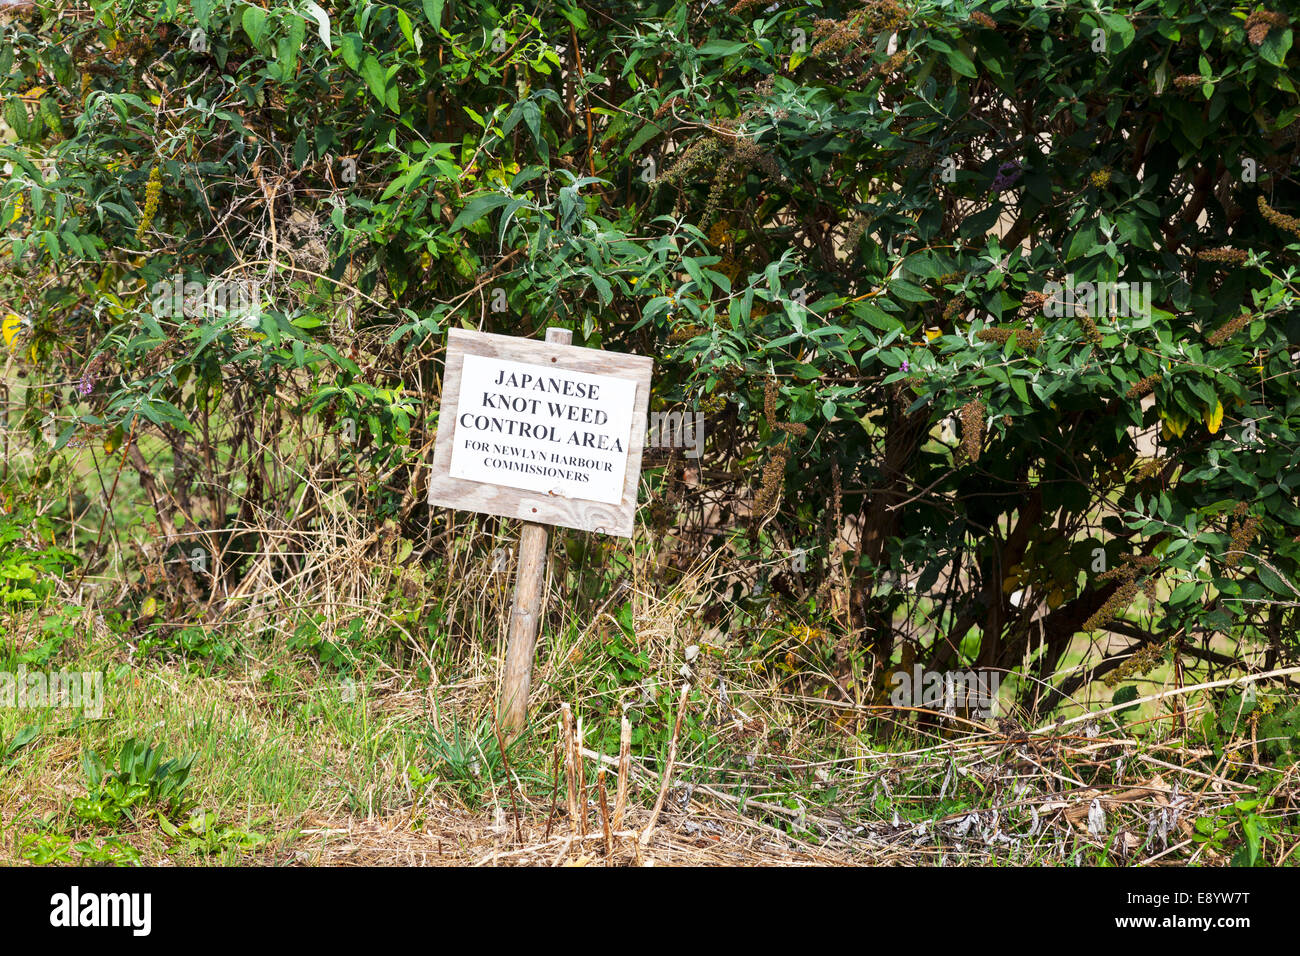 Japanese knot weed knotweed control area sign on verge in Newlyn Cornwall UK England Stock Photo